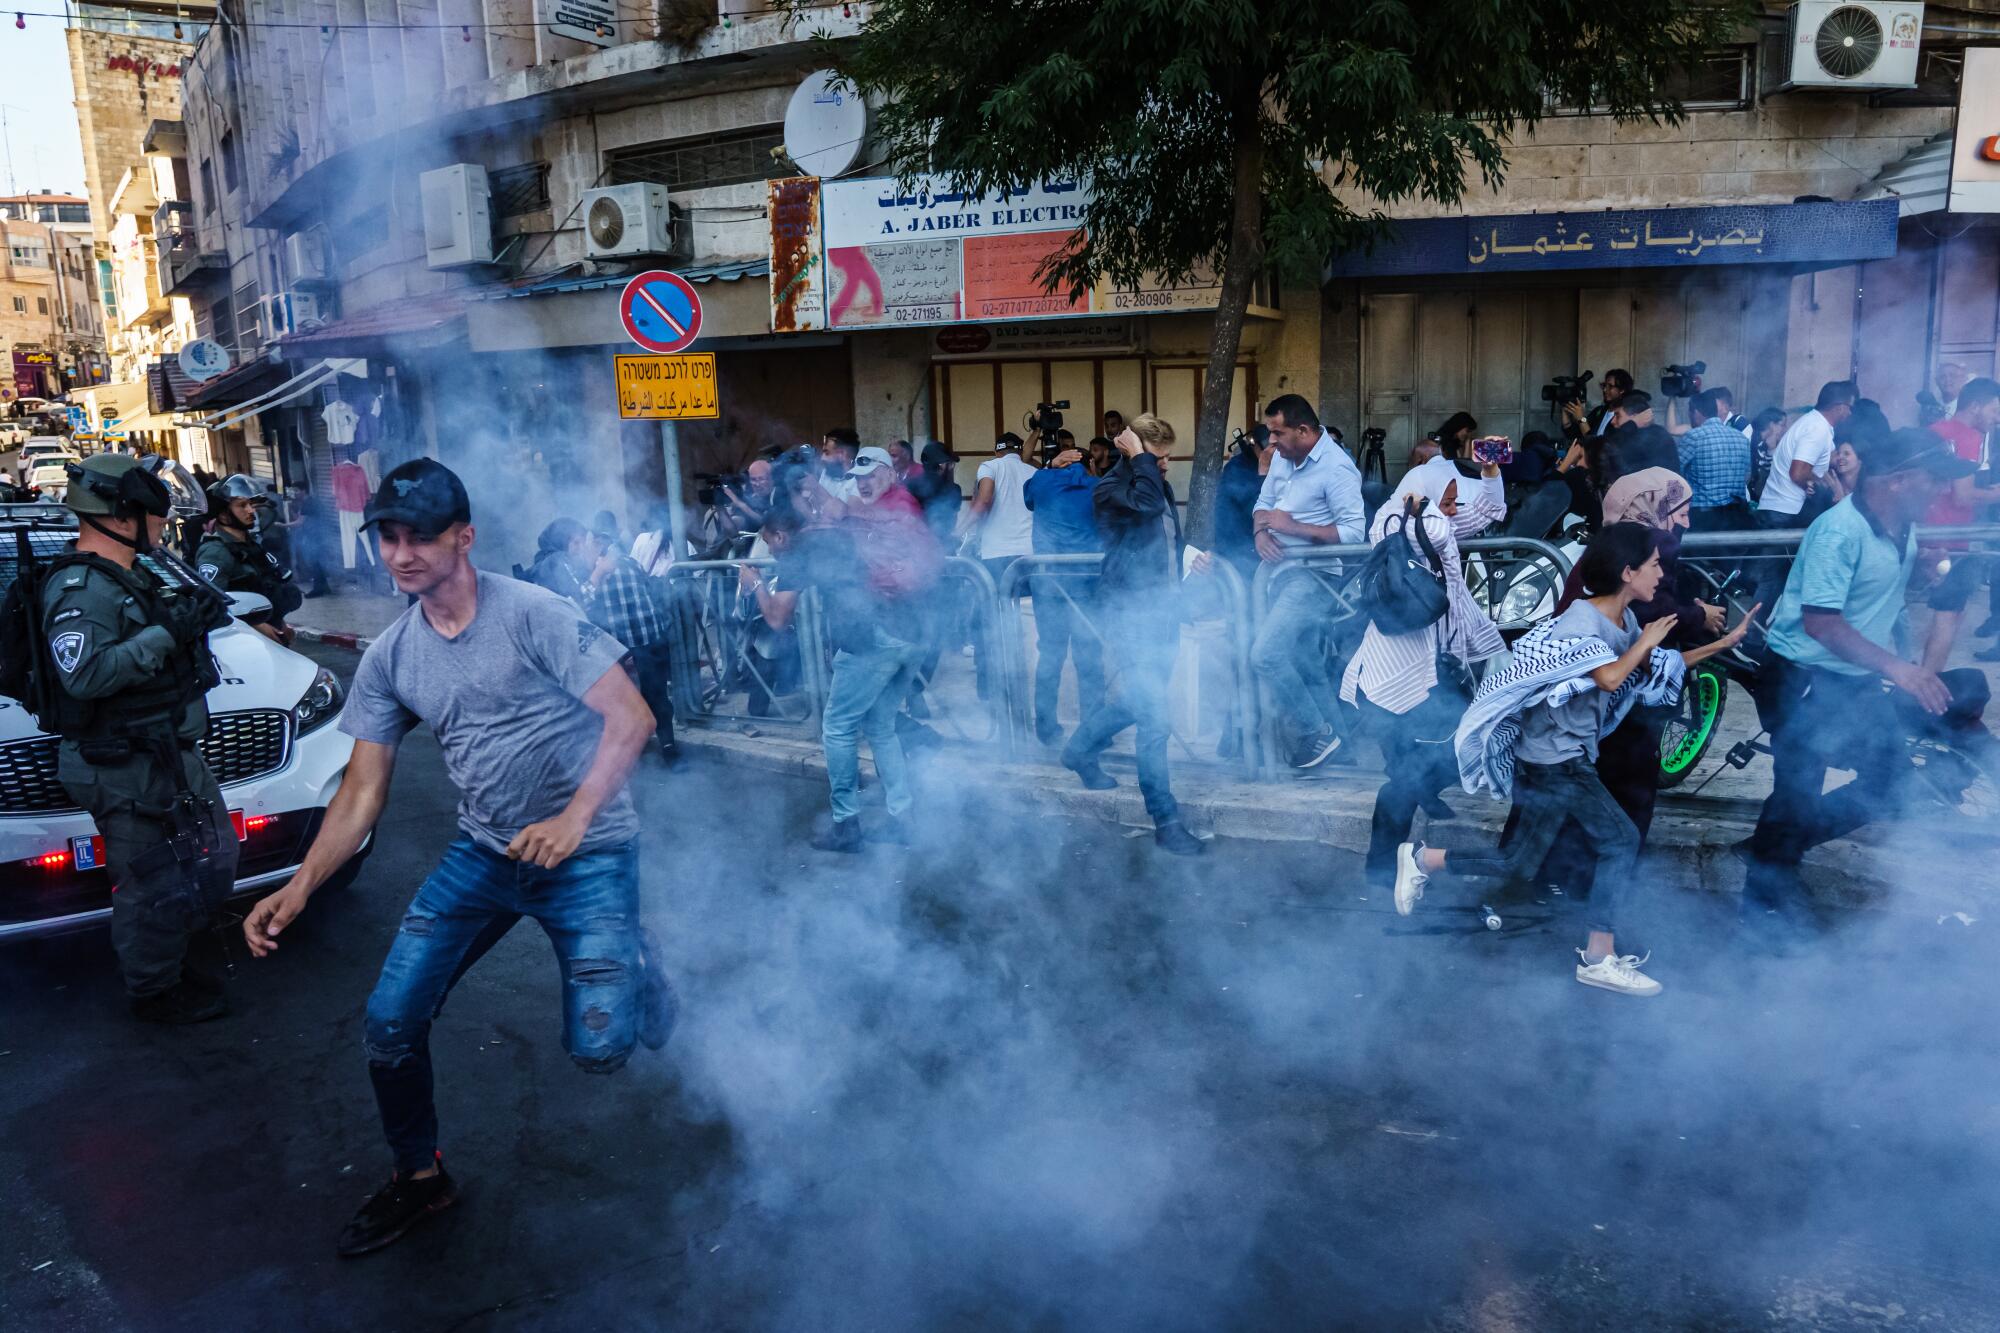 Israeli security forces throw stun grenades to disperse a crowd gathered for a news conference.